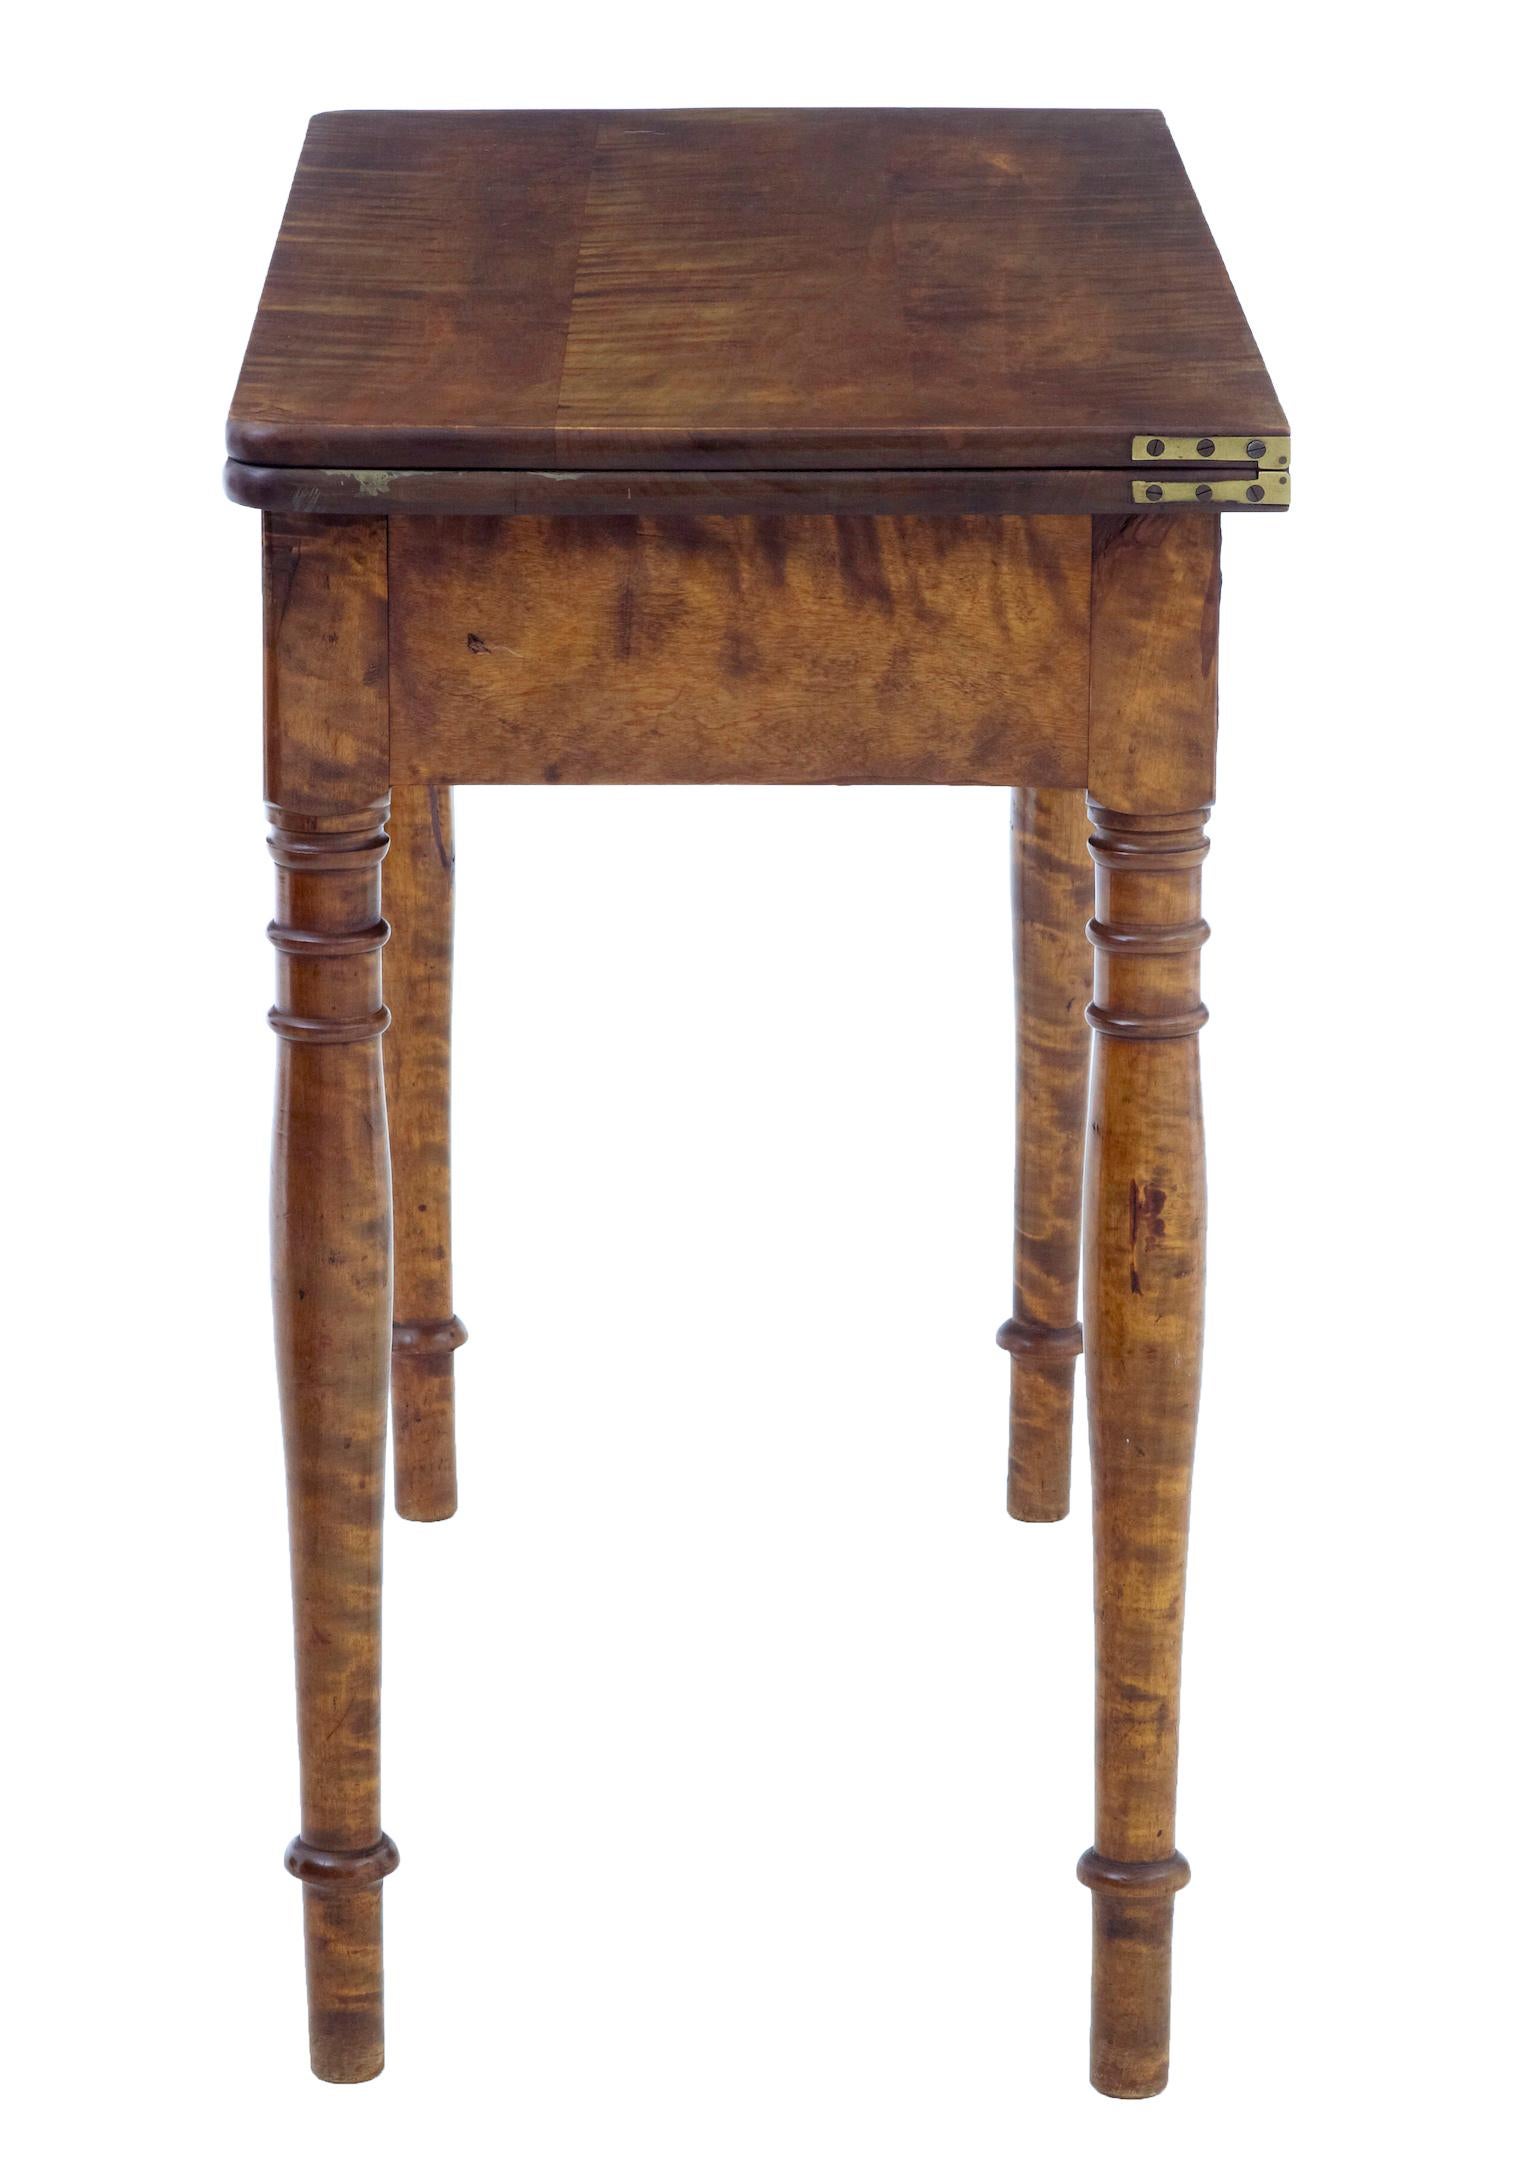 19th century Swedish birch tea table circa 1890.

Good quality stained birch table, rectangular top with rounded corners.  Twists and then flips open to form a larger table surface, with a storage well underneath.

Could function in multiple rooms